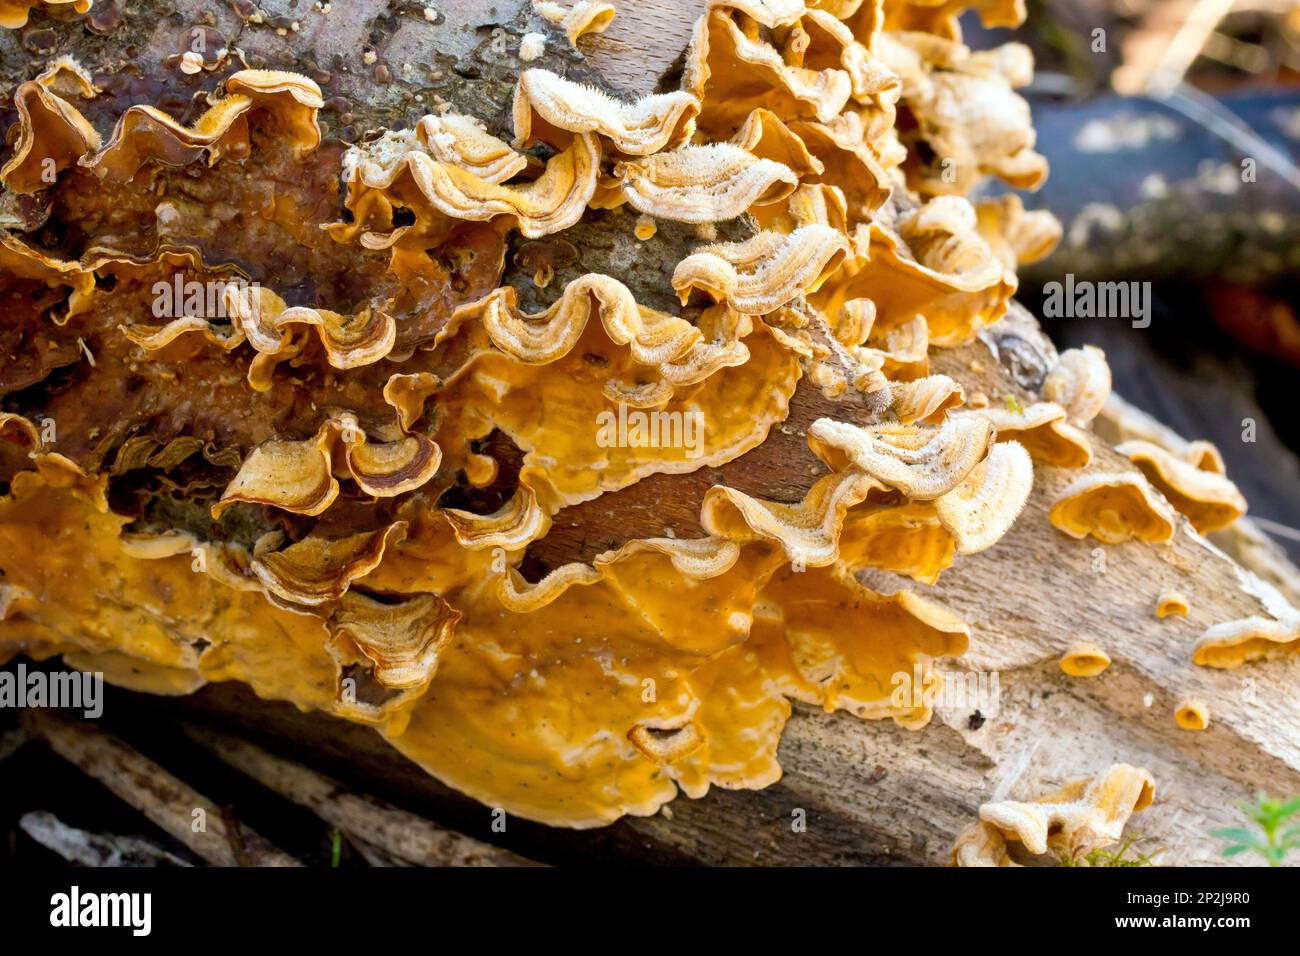 Close up of the fruiting bodies of the fungus stereum hirsutum or Hairy Curtain Crust, growing beneath and around a rotting log. Stock Photo